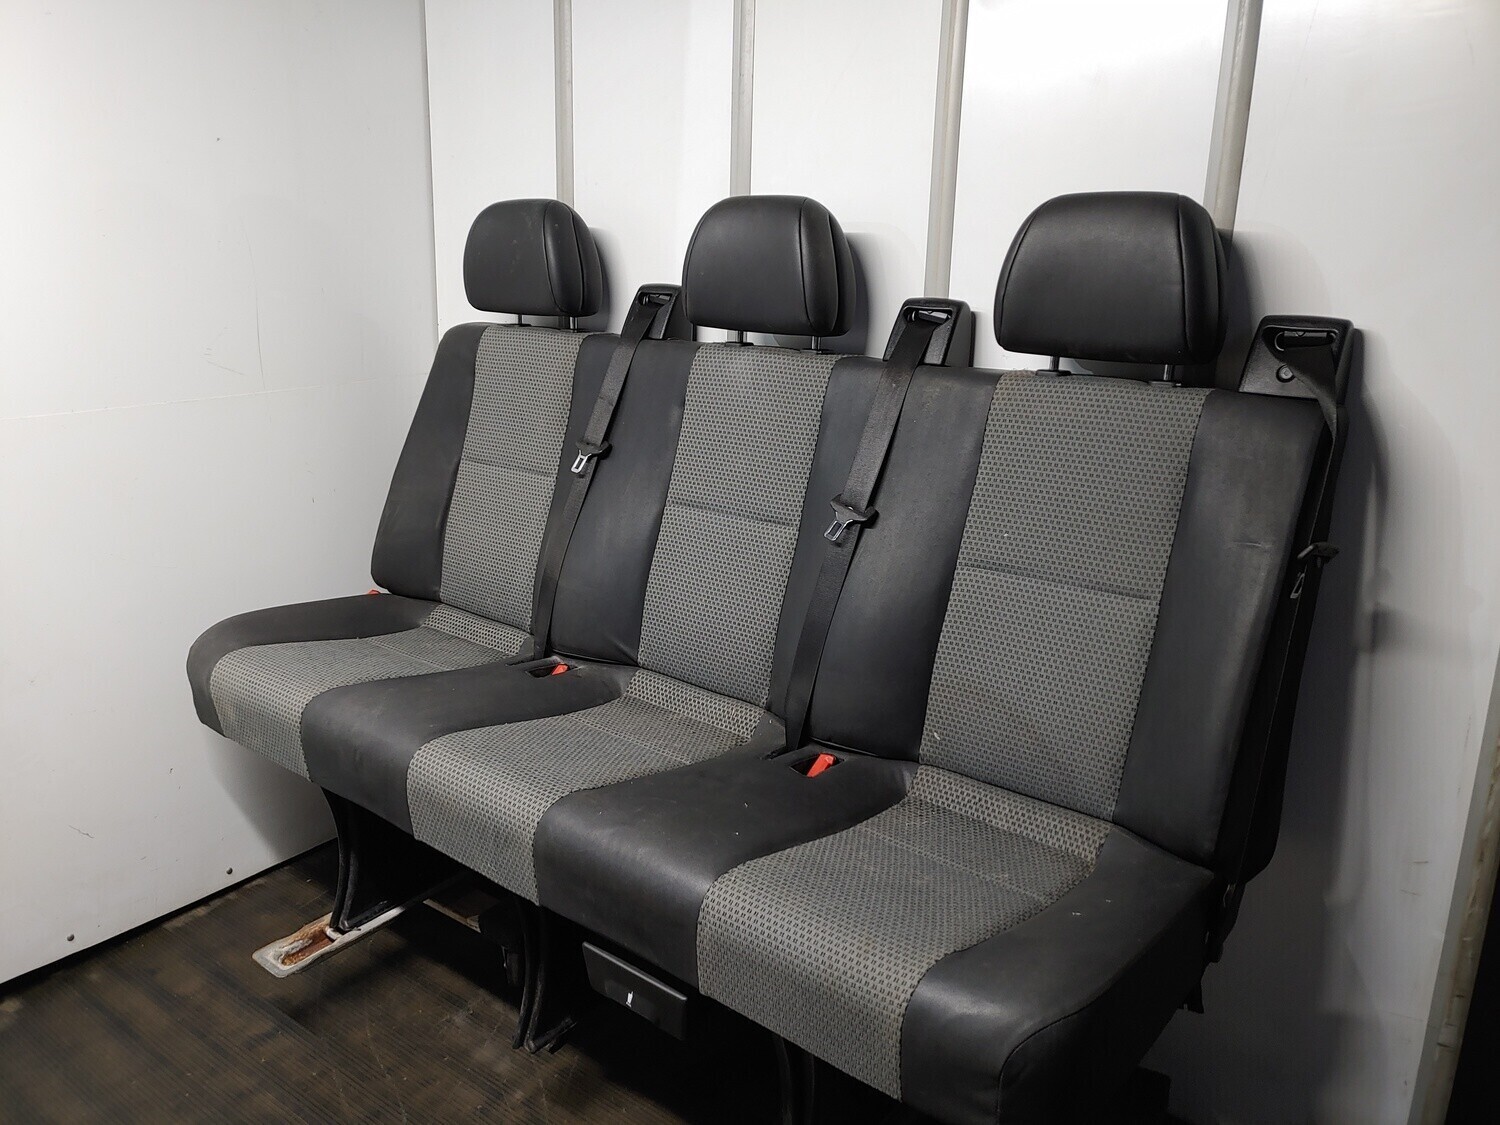 4 Passenger Bench Seat - Removable